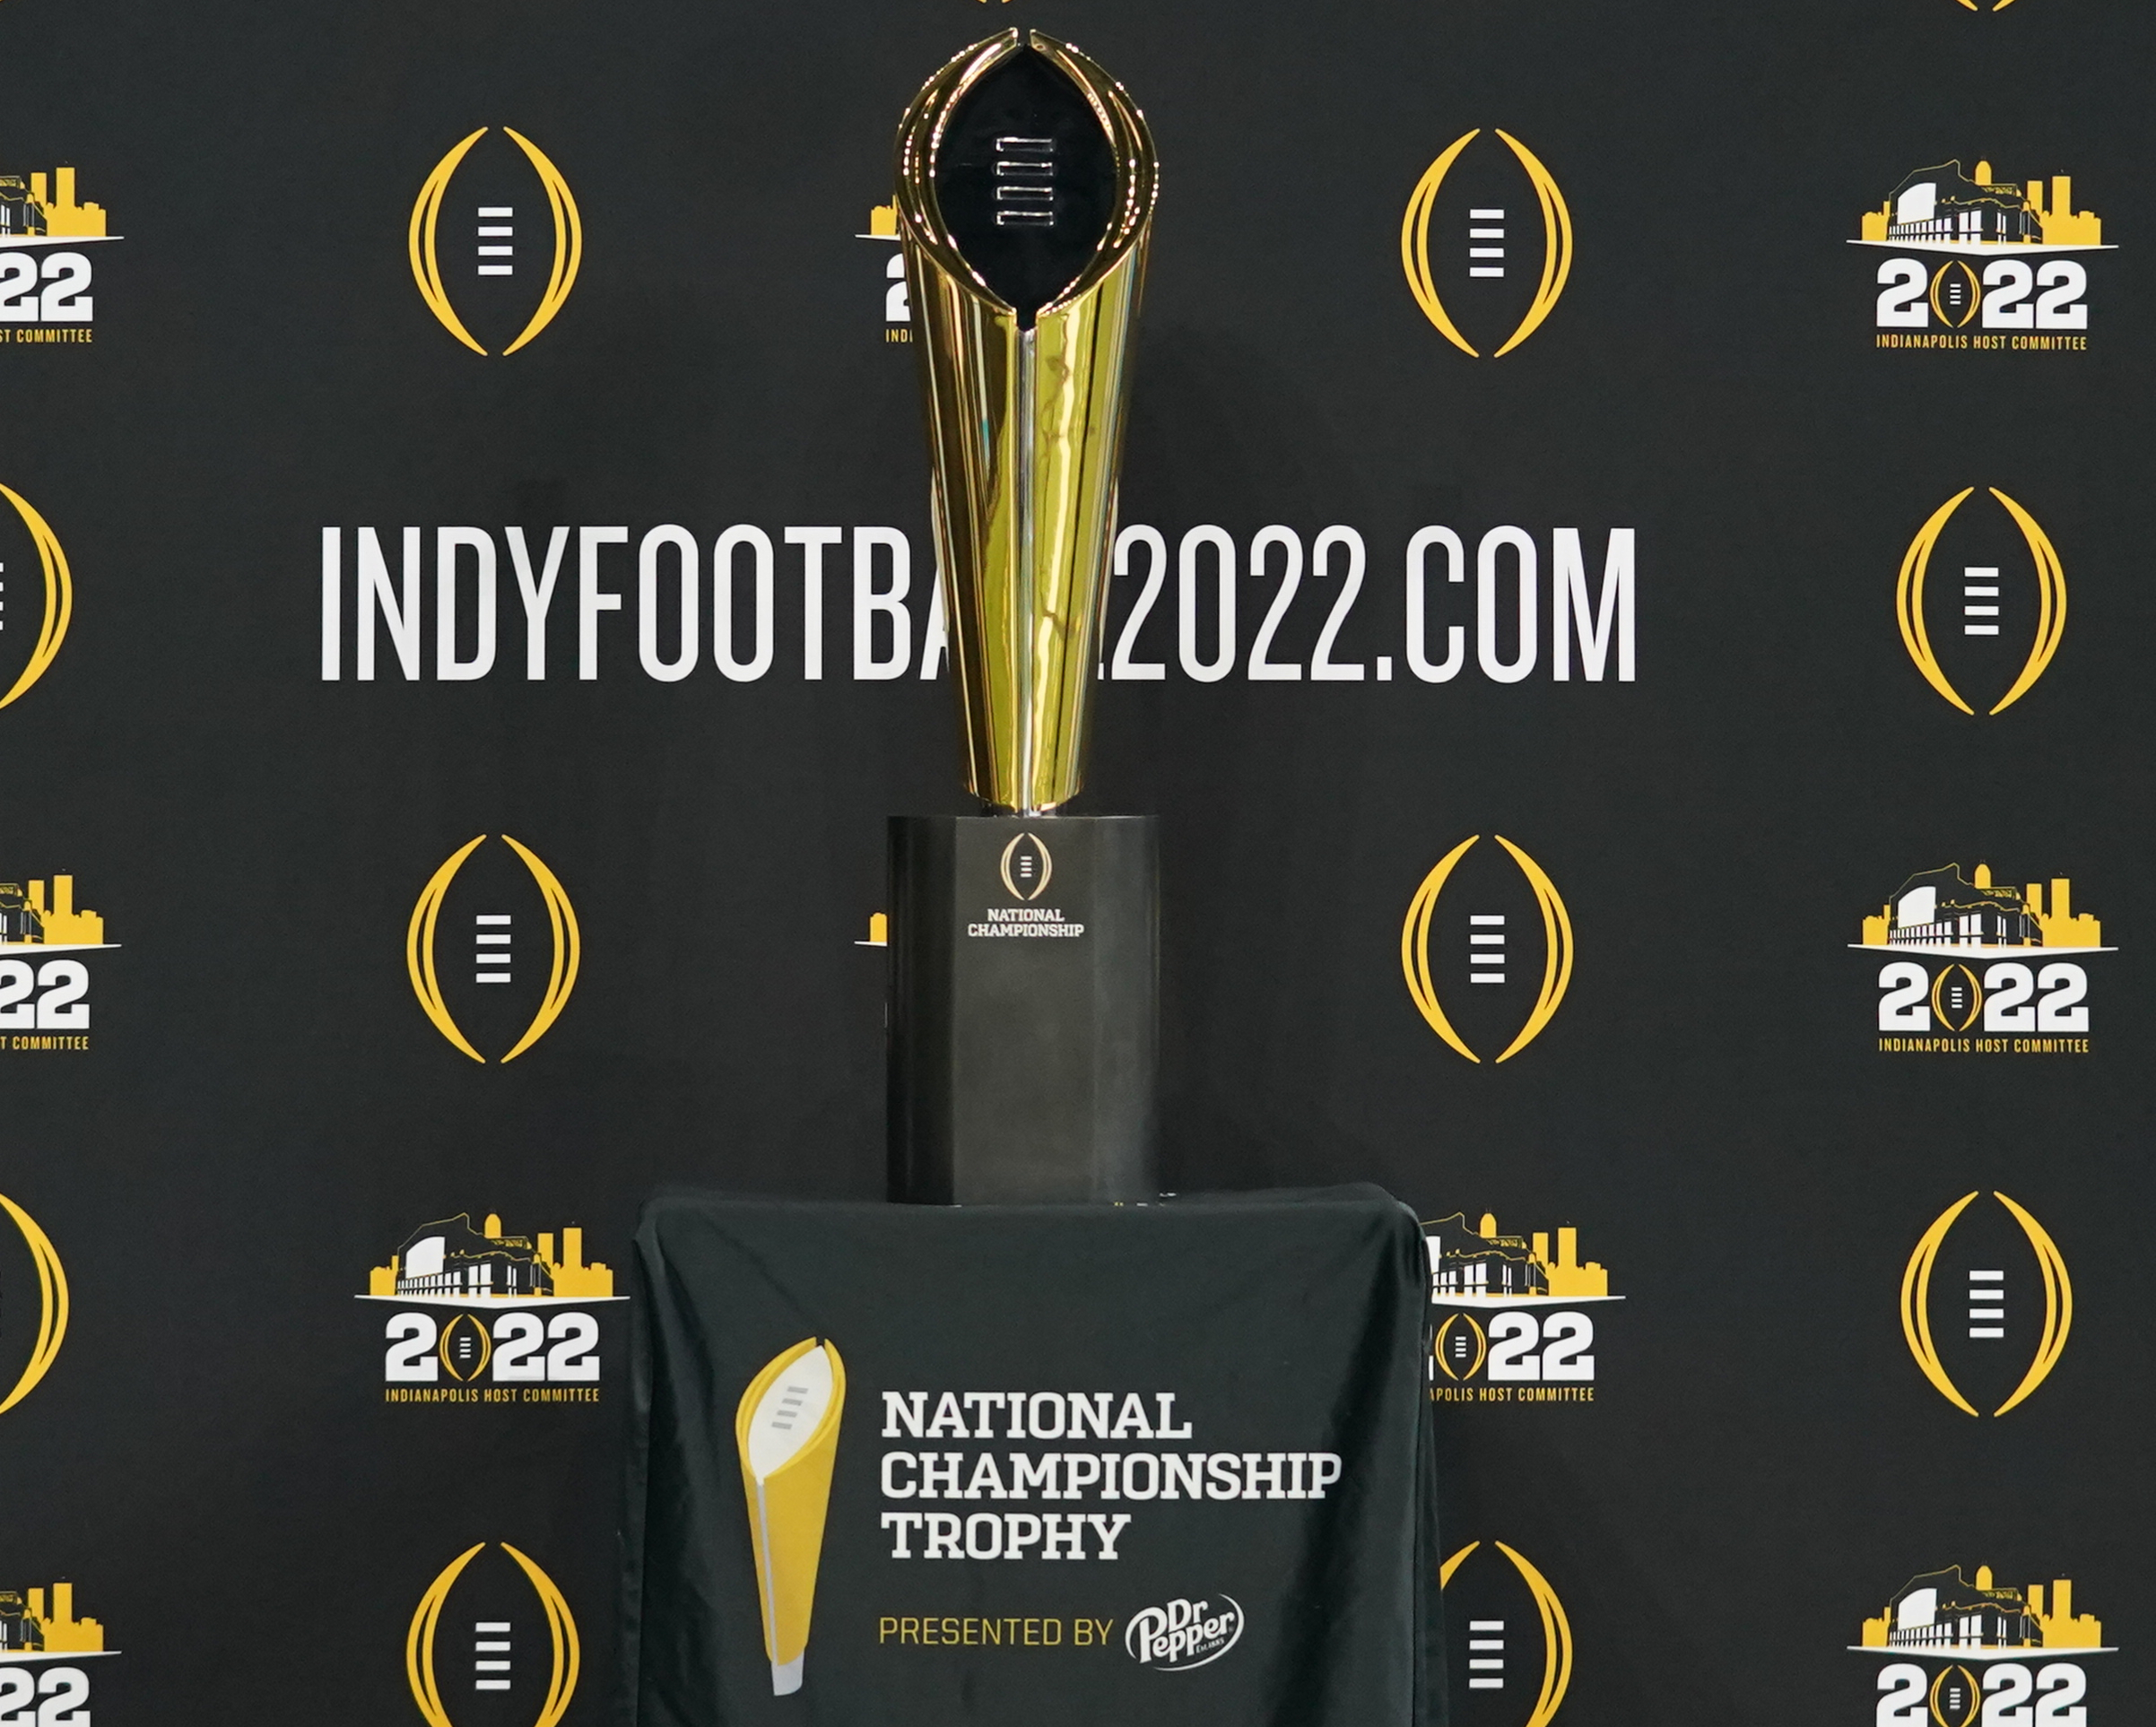 The College Football Playoff national championship trophy is displayed during Big 10 media days at Lucas Oil Stadium.